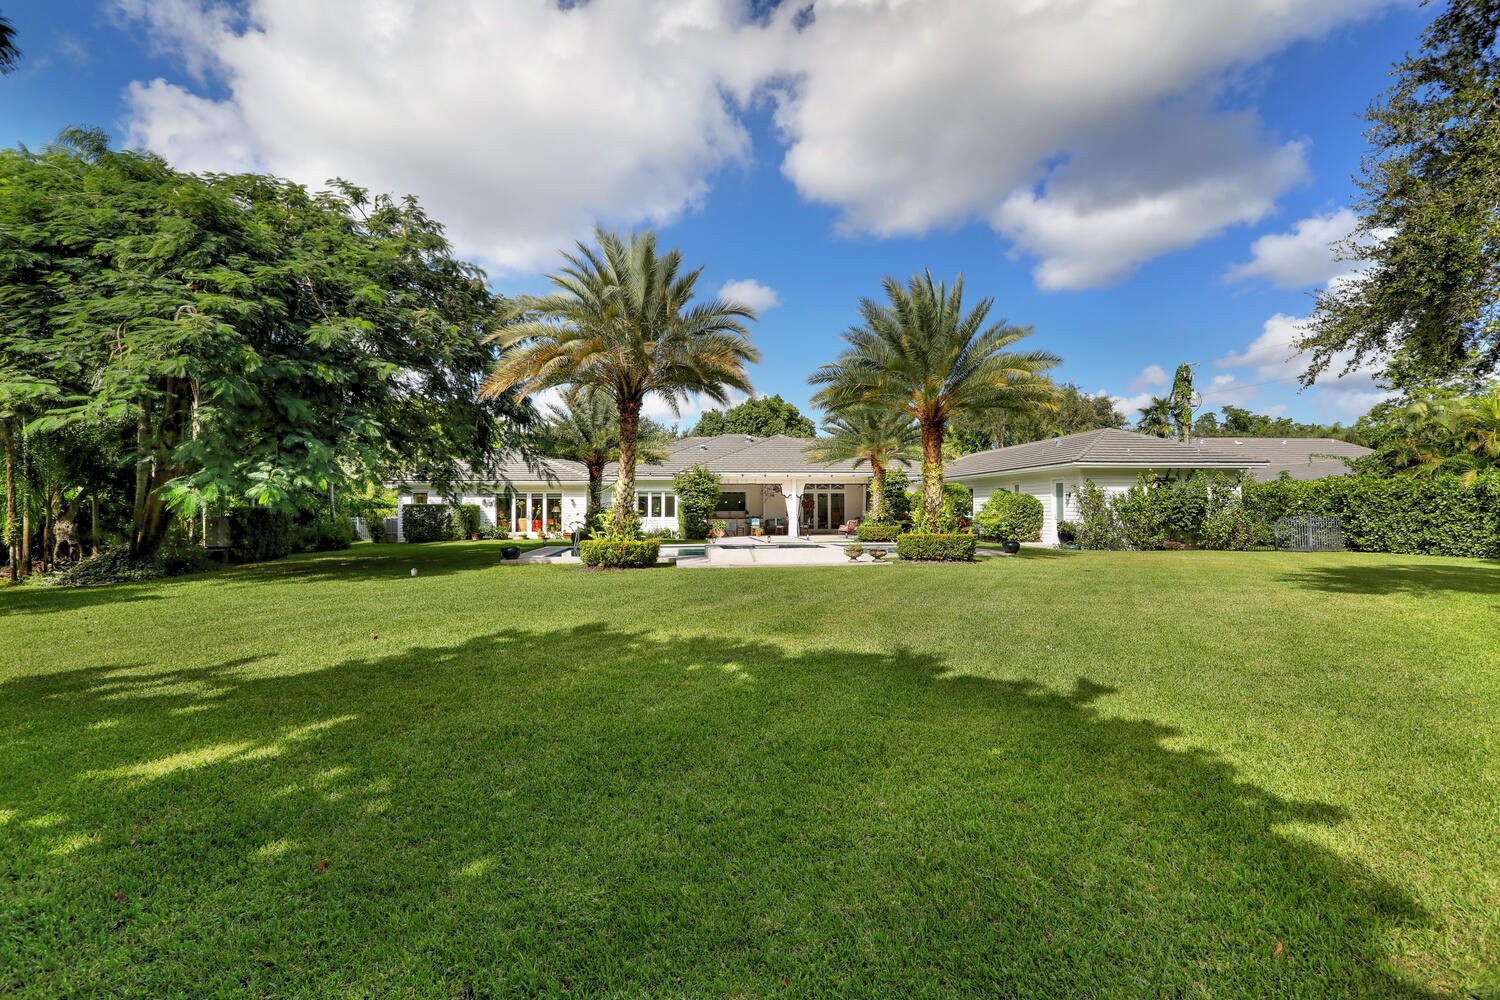 Master Brokers Forum Listing: Check Out This 'Hamptons Meets Key West' Style North Pinecrest Home Asking $5.8 Million 17.jpg